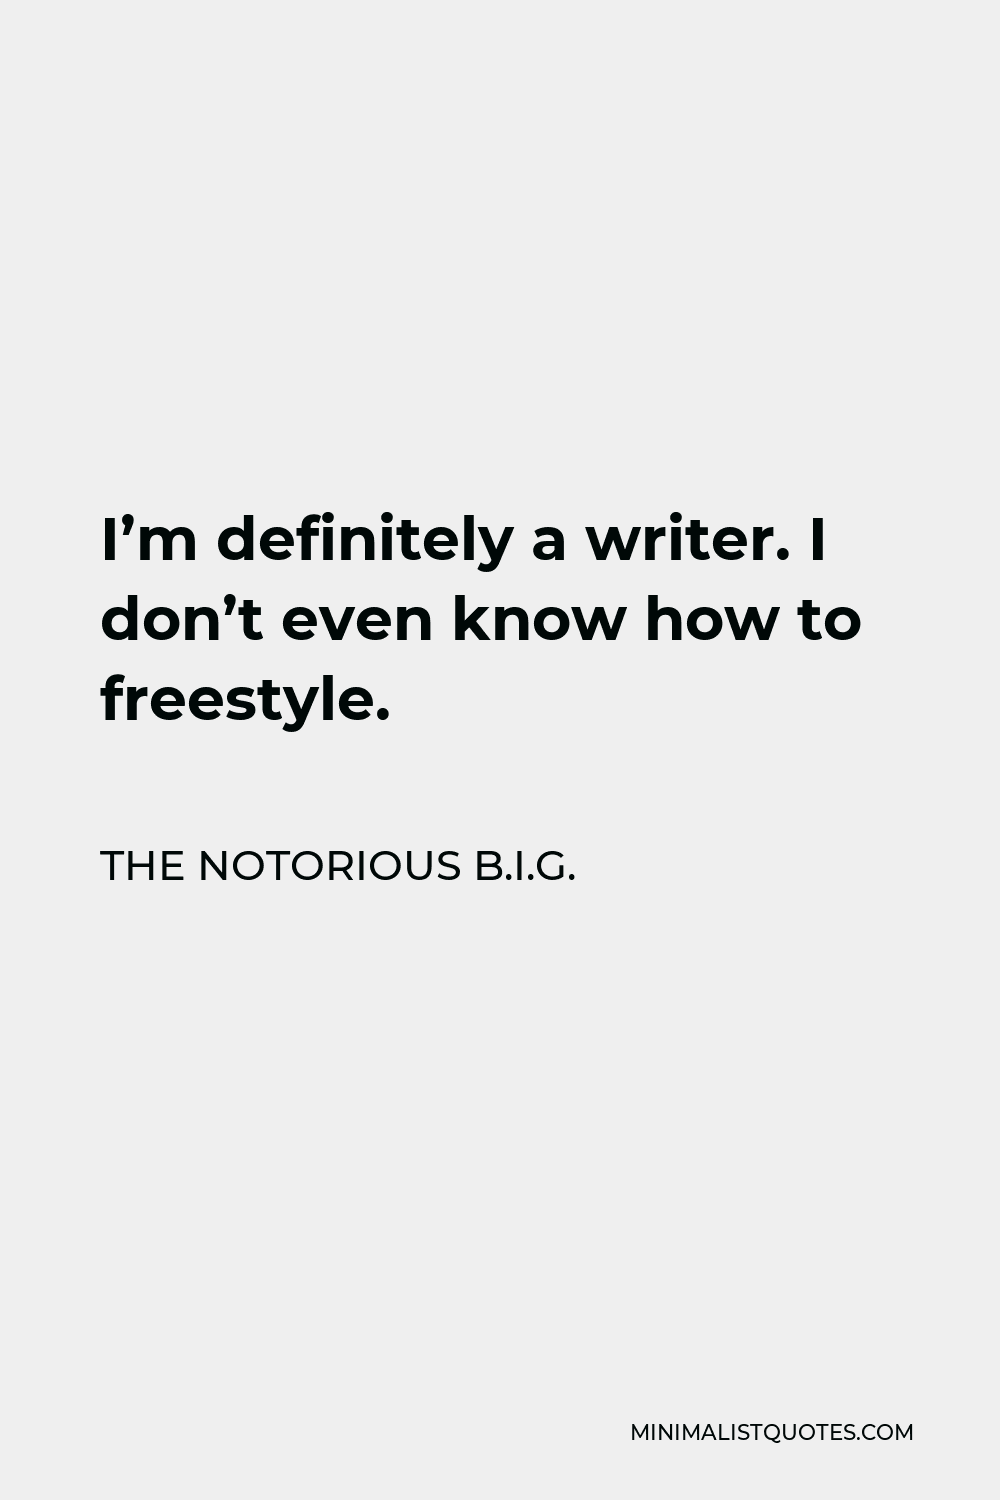 The Notorious B.I.G. Quote - I’m definitely a writer. I don’t even know how to freestyle.